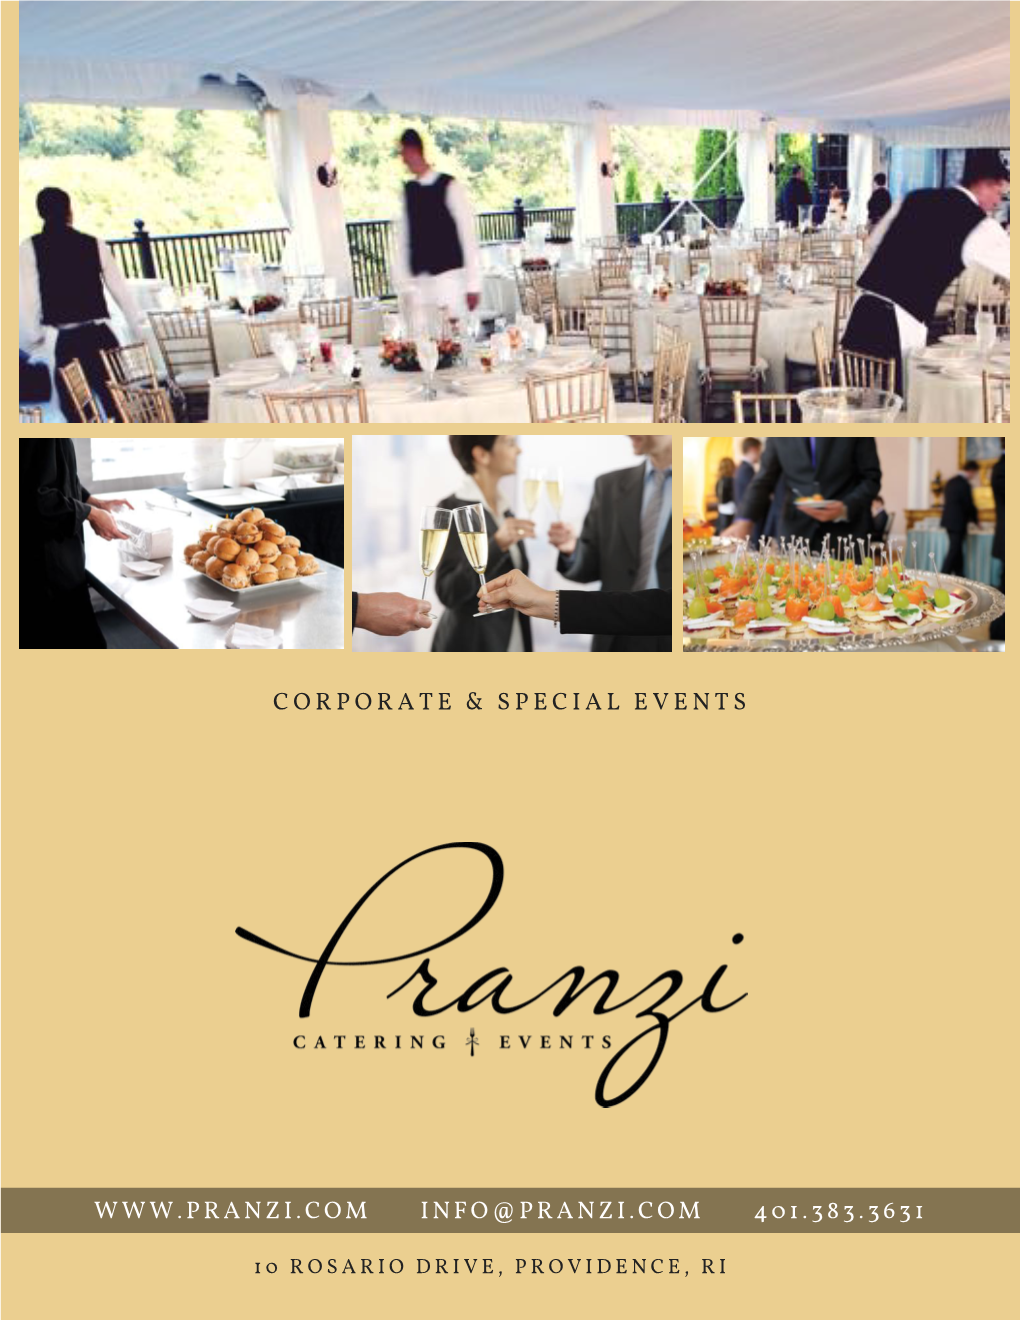 Pranzi Catering & Events Raises the Bar for Off-Premise Catering and Event Services in New England